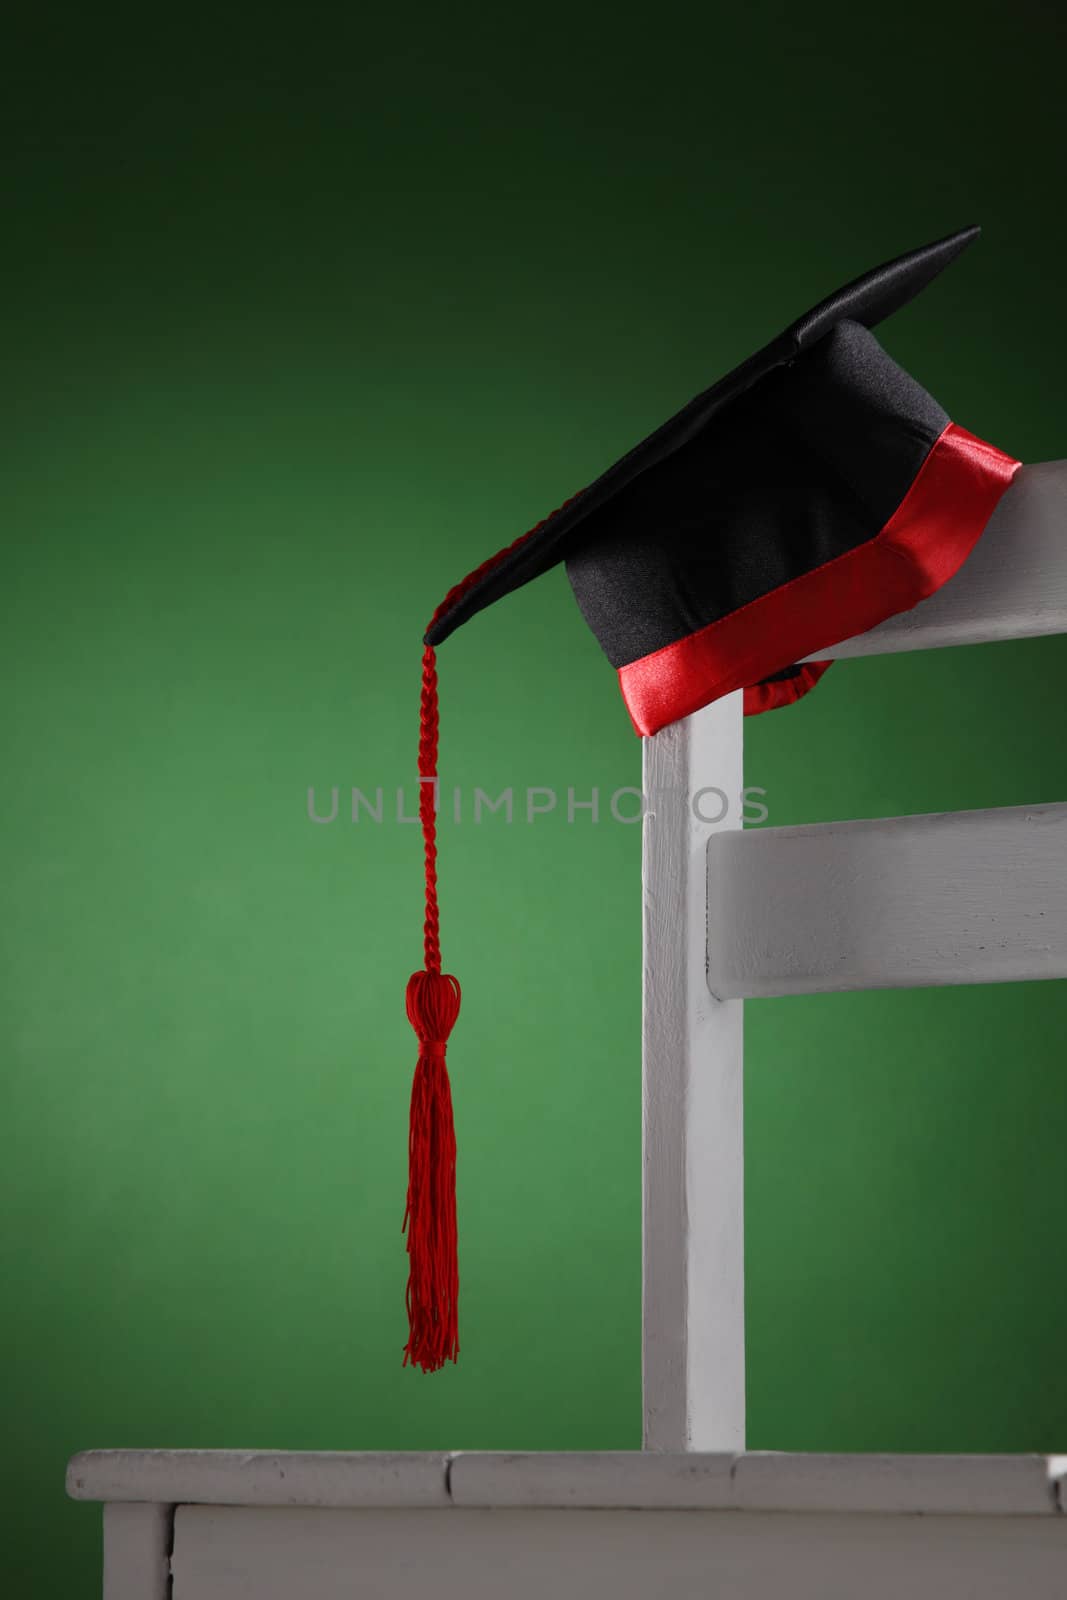 mortar board on the chair